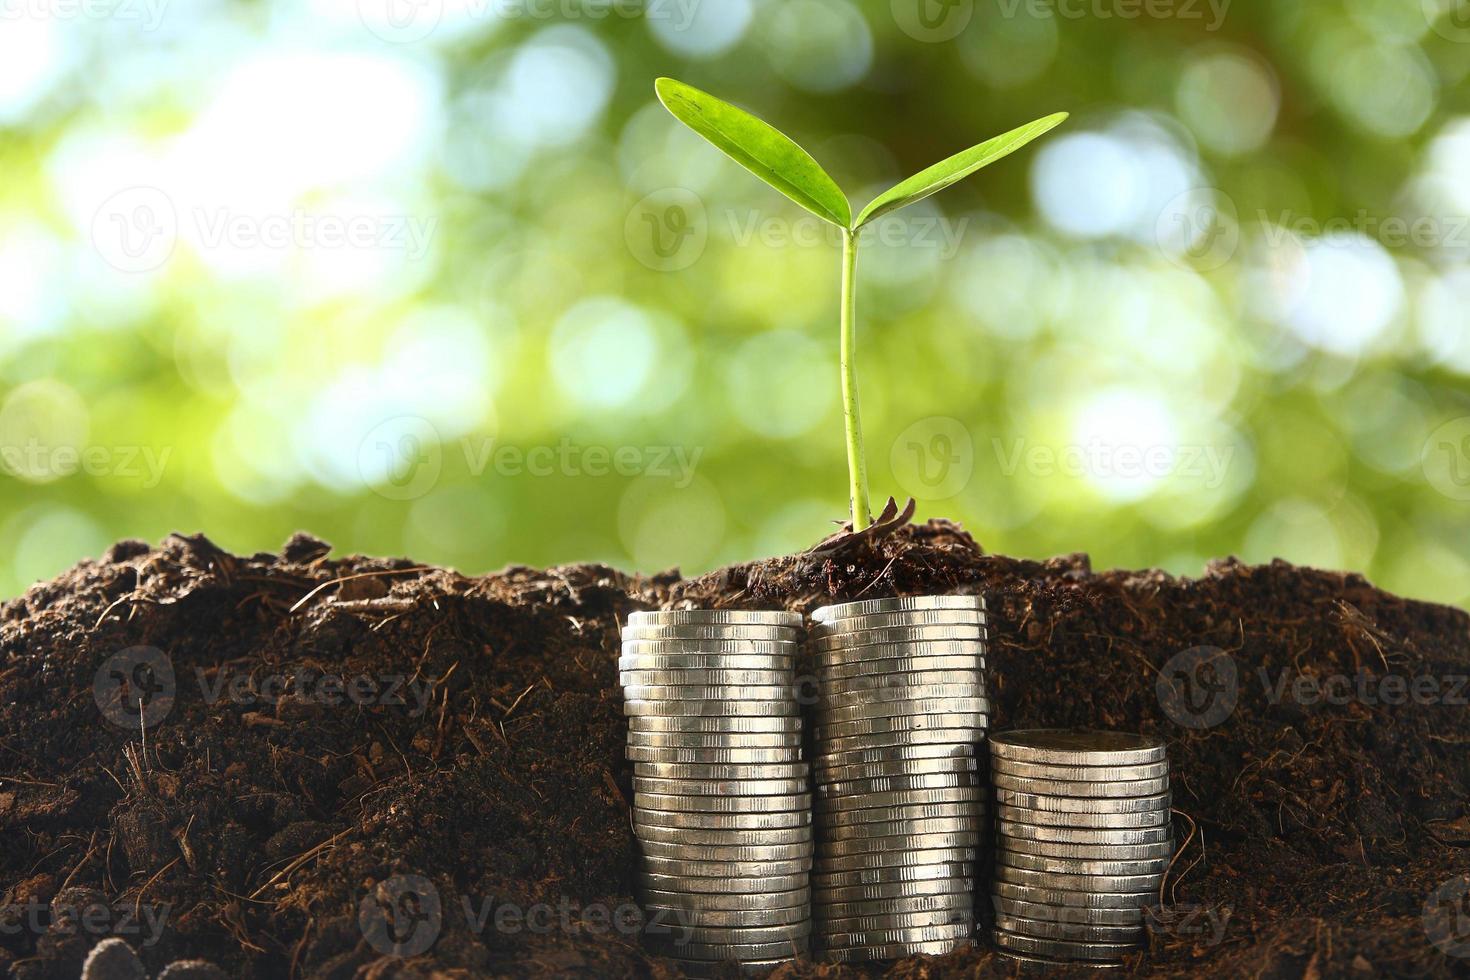 Small trees on a pile of coins. Underground The backdrop is green. photo